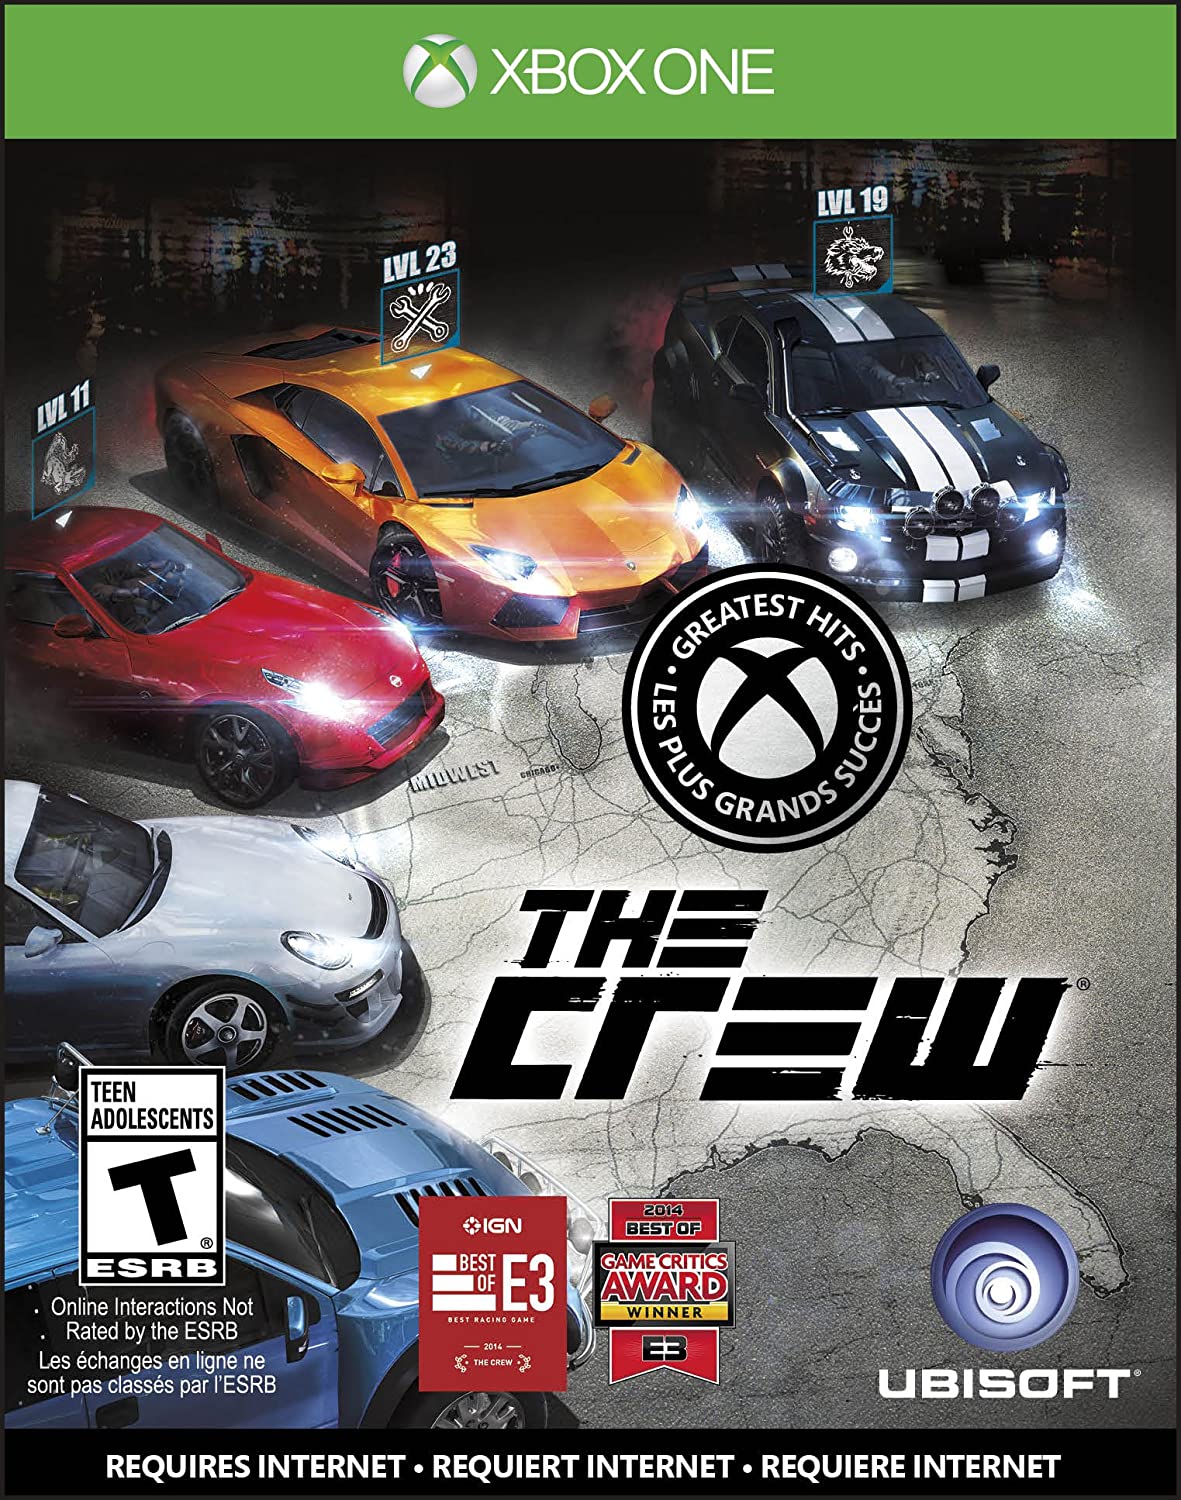 The Crew player count stats